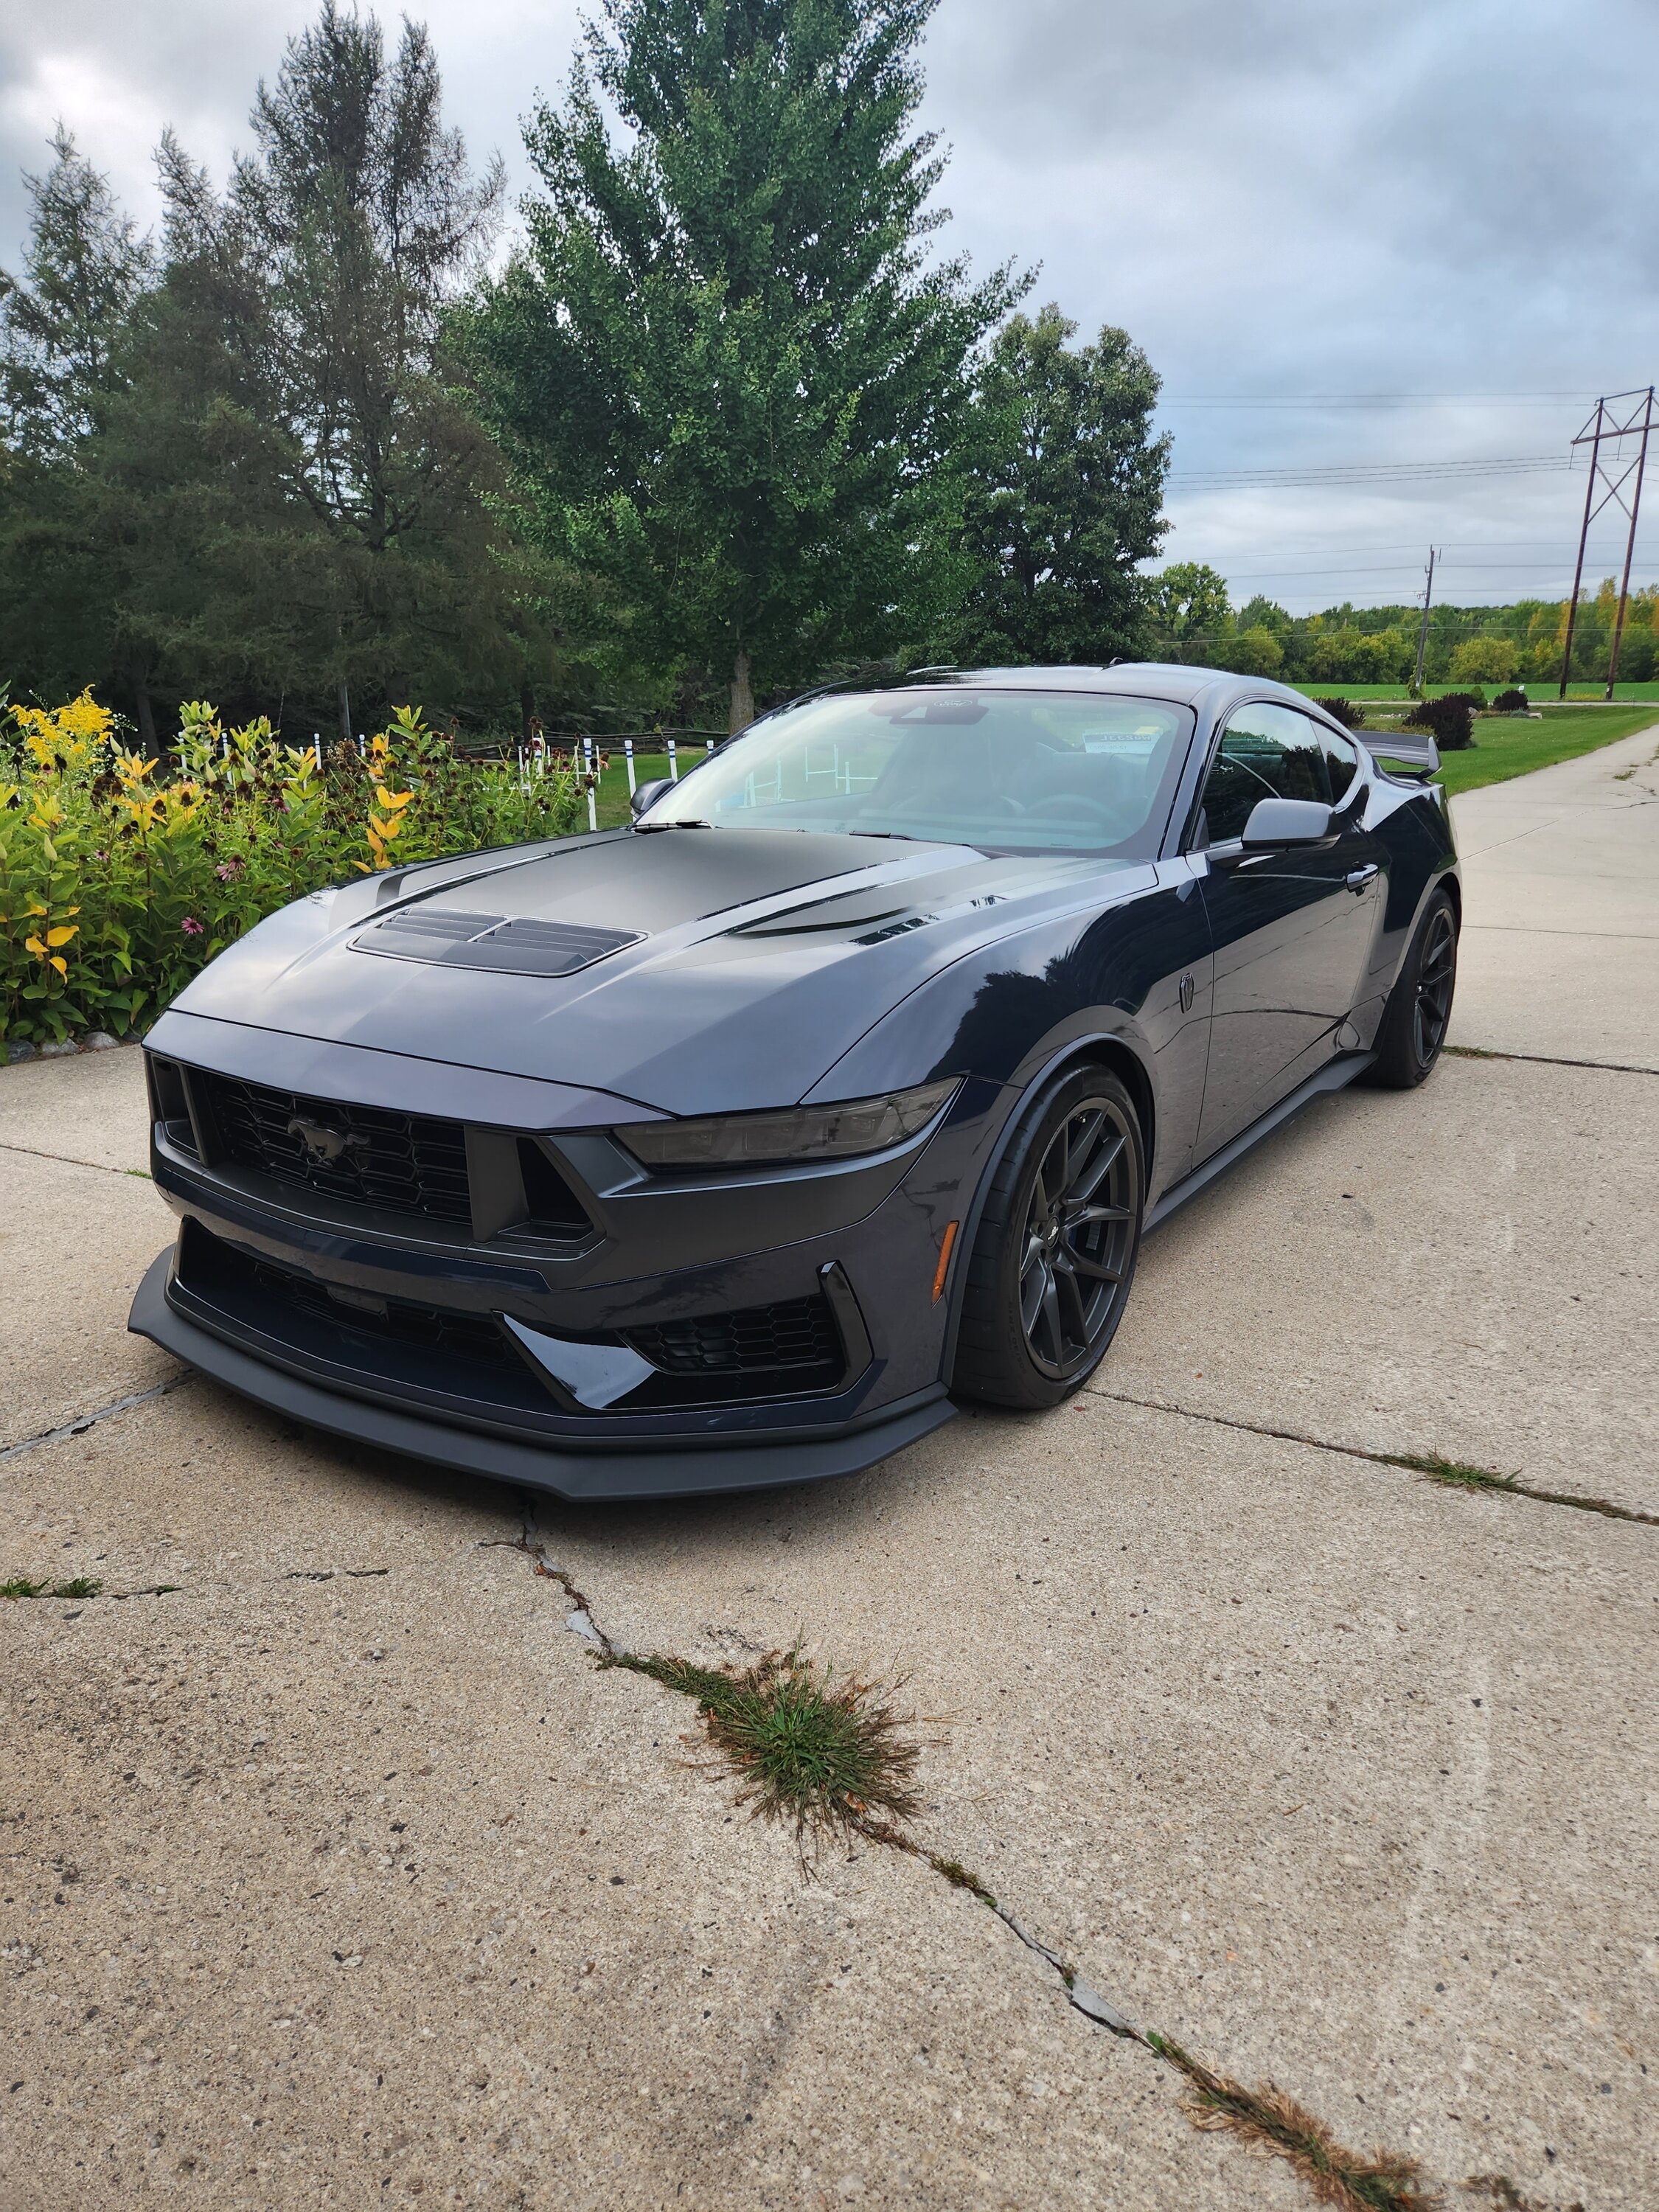 S650 Mustang Delivery Pics & Video: Pyroguy's Blue Ember Dark Horse, HP 20230907_184927